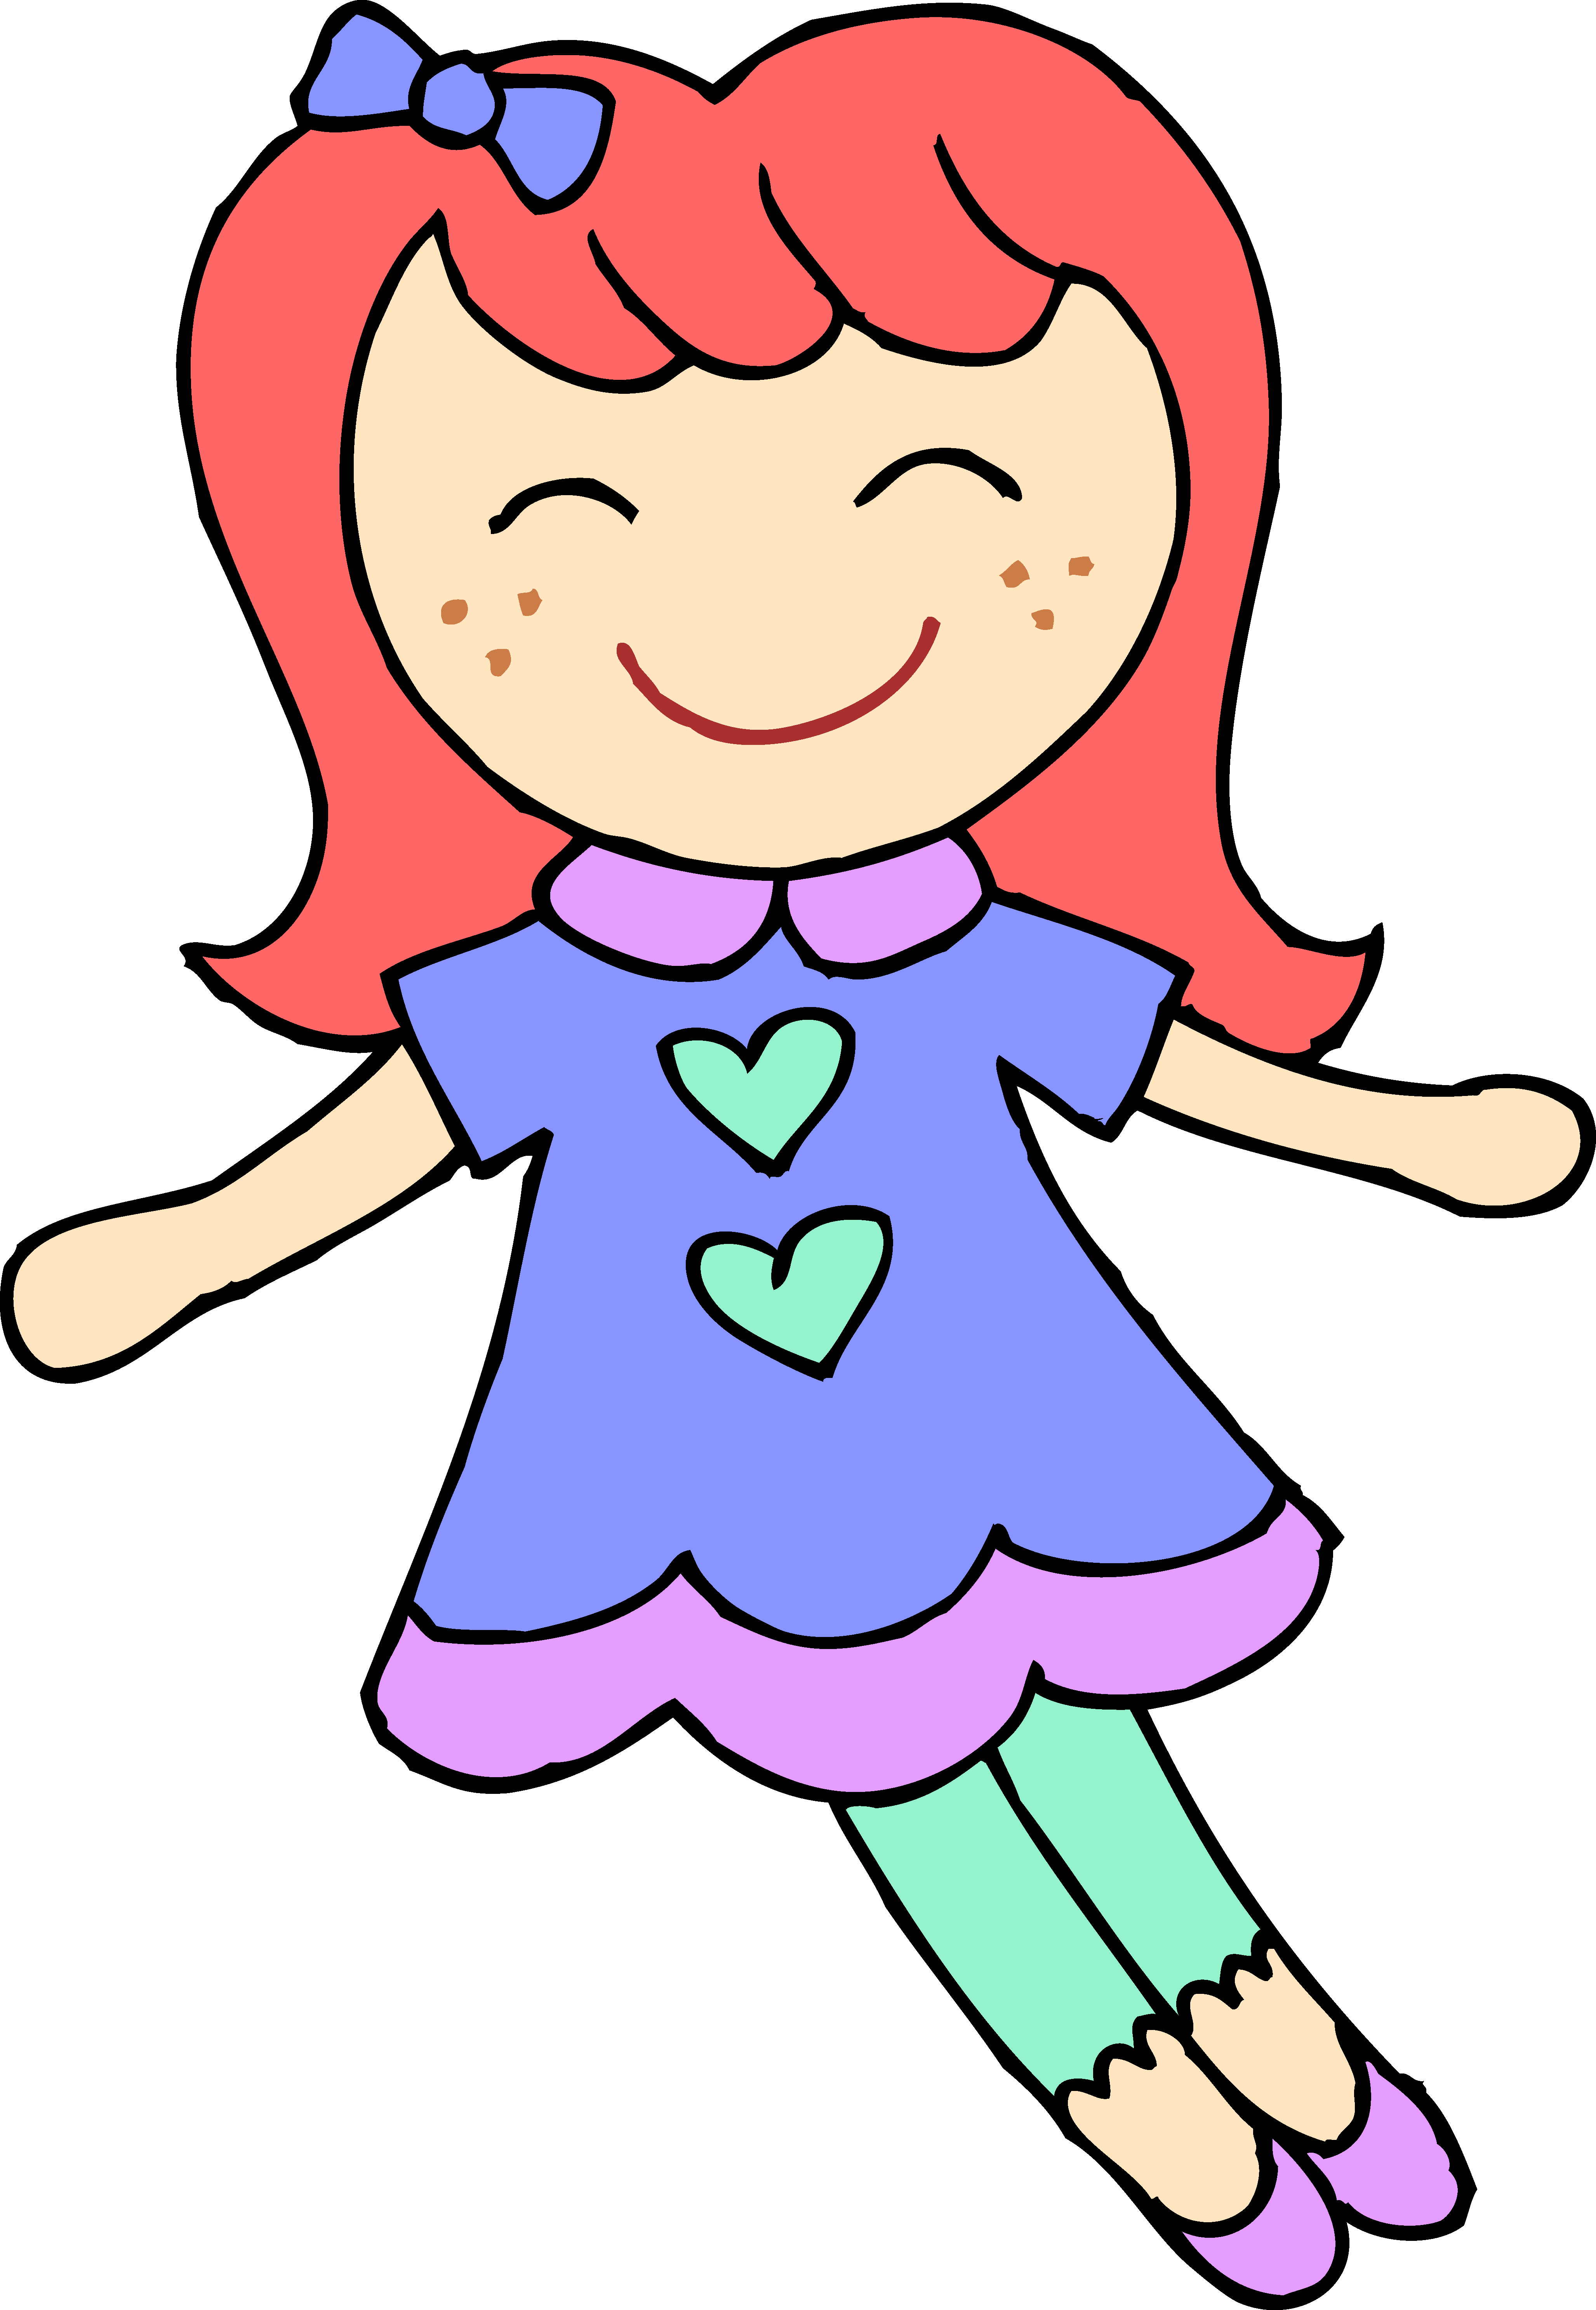 Baby Doll Clipart - Cliparts.co